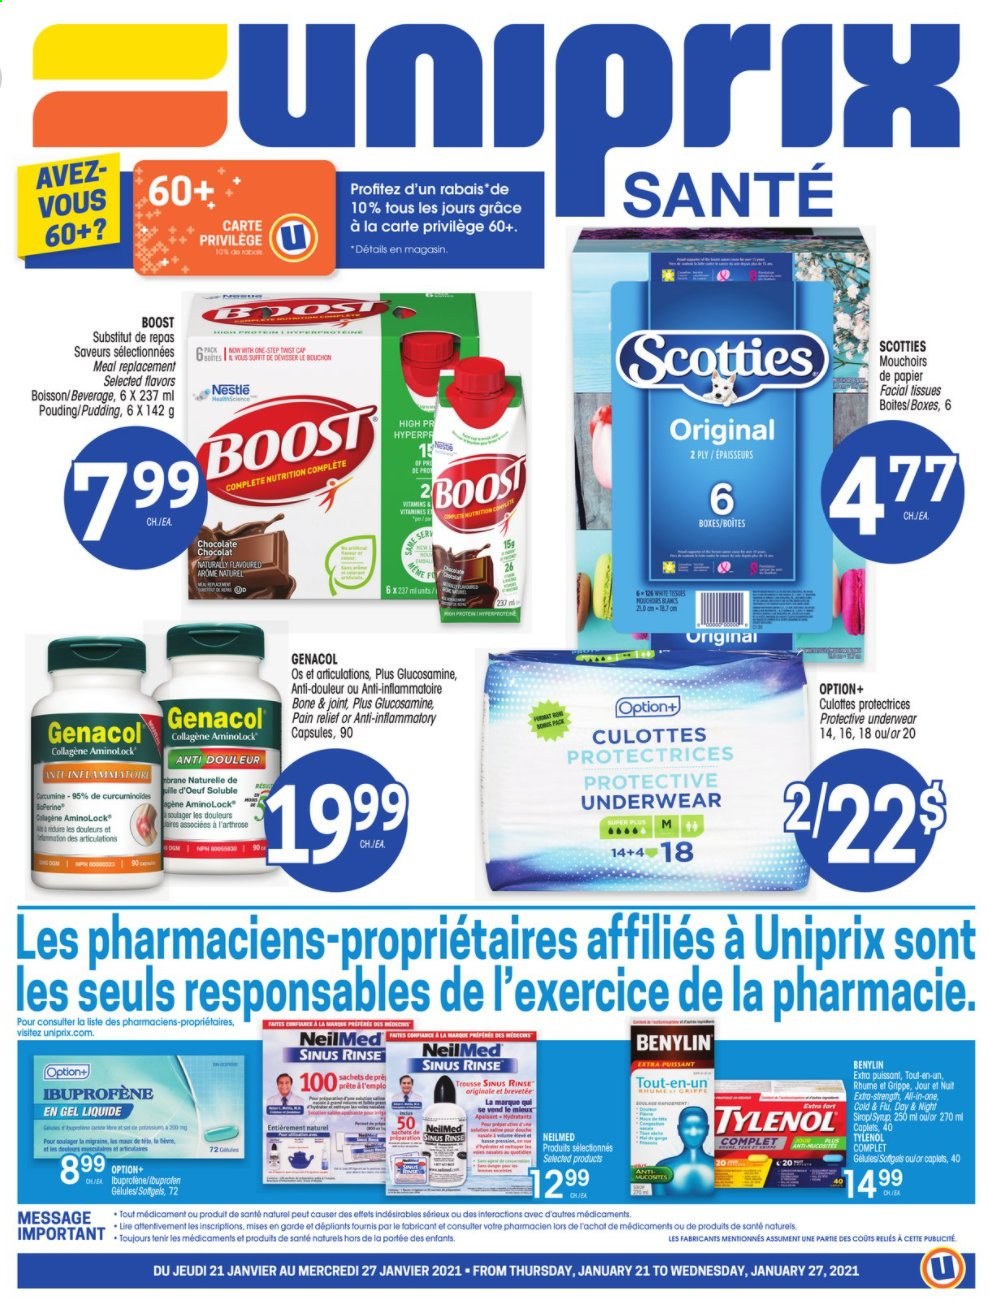 thumbnail - Uniprix Santé Flyer - January 21, 2021 - January 27, 2021 - Sales products - chocolate, pudding, Boost, tissues, facial tissues, Cold & Flu, Tylenol, Benylin, Nestlé. Page 1.